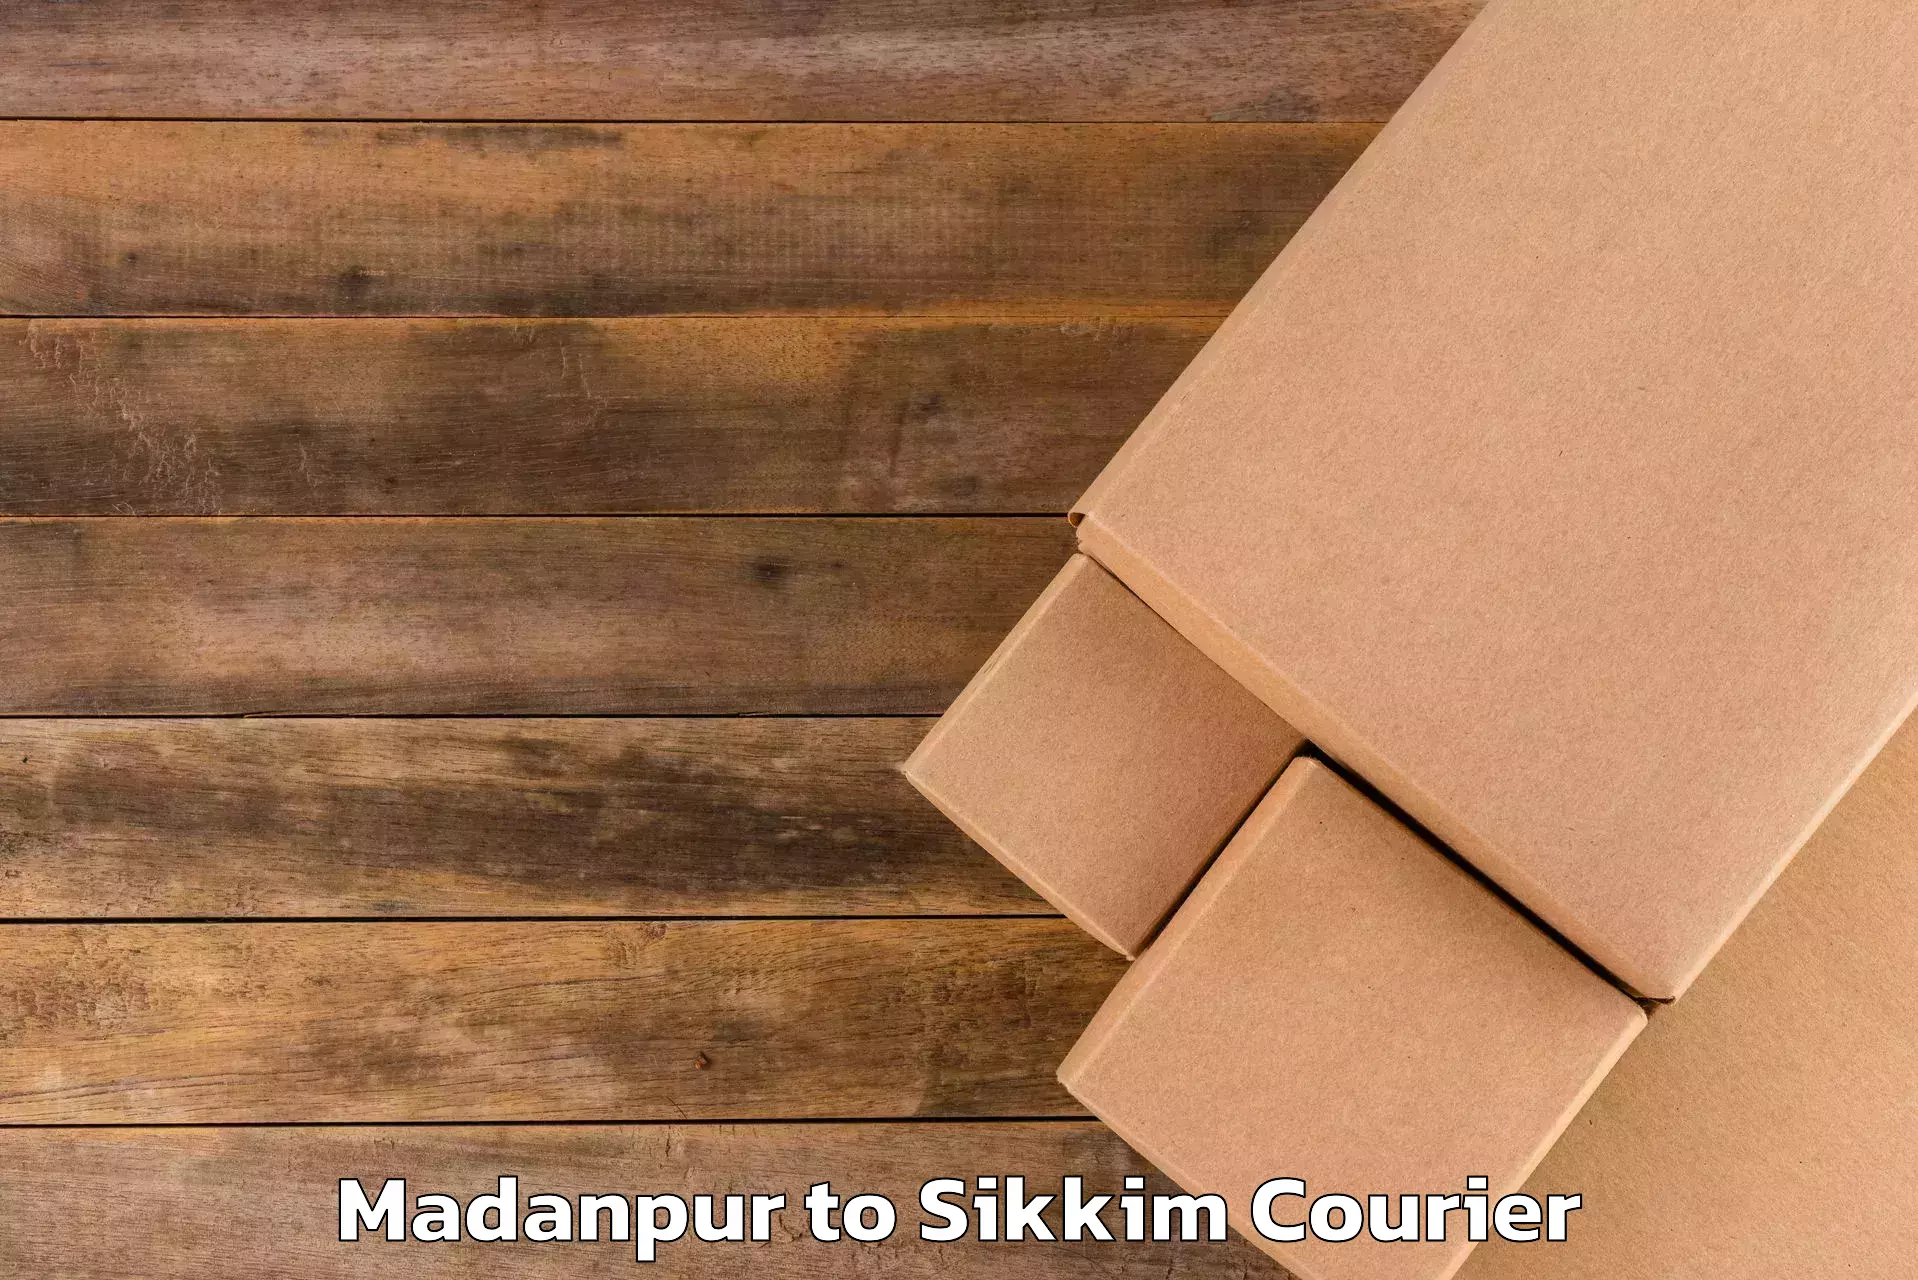 Luggage delivery app Madanpur to Sikkim